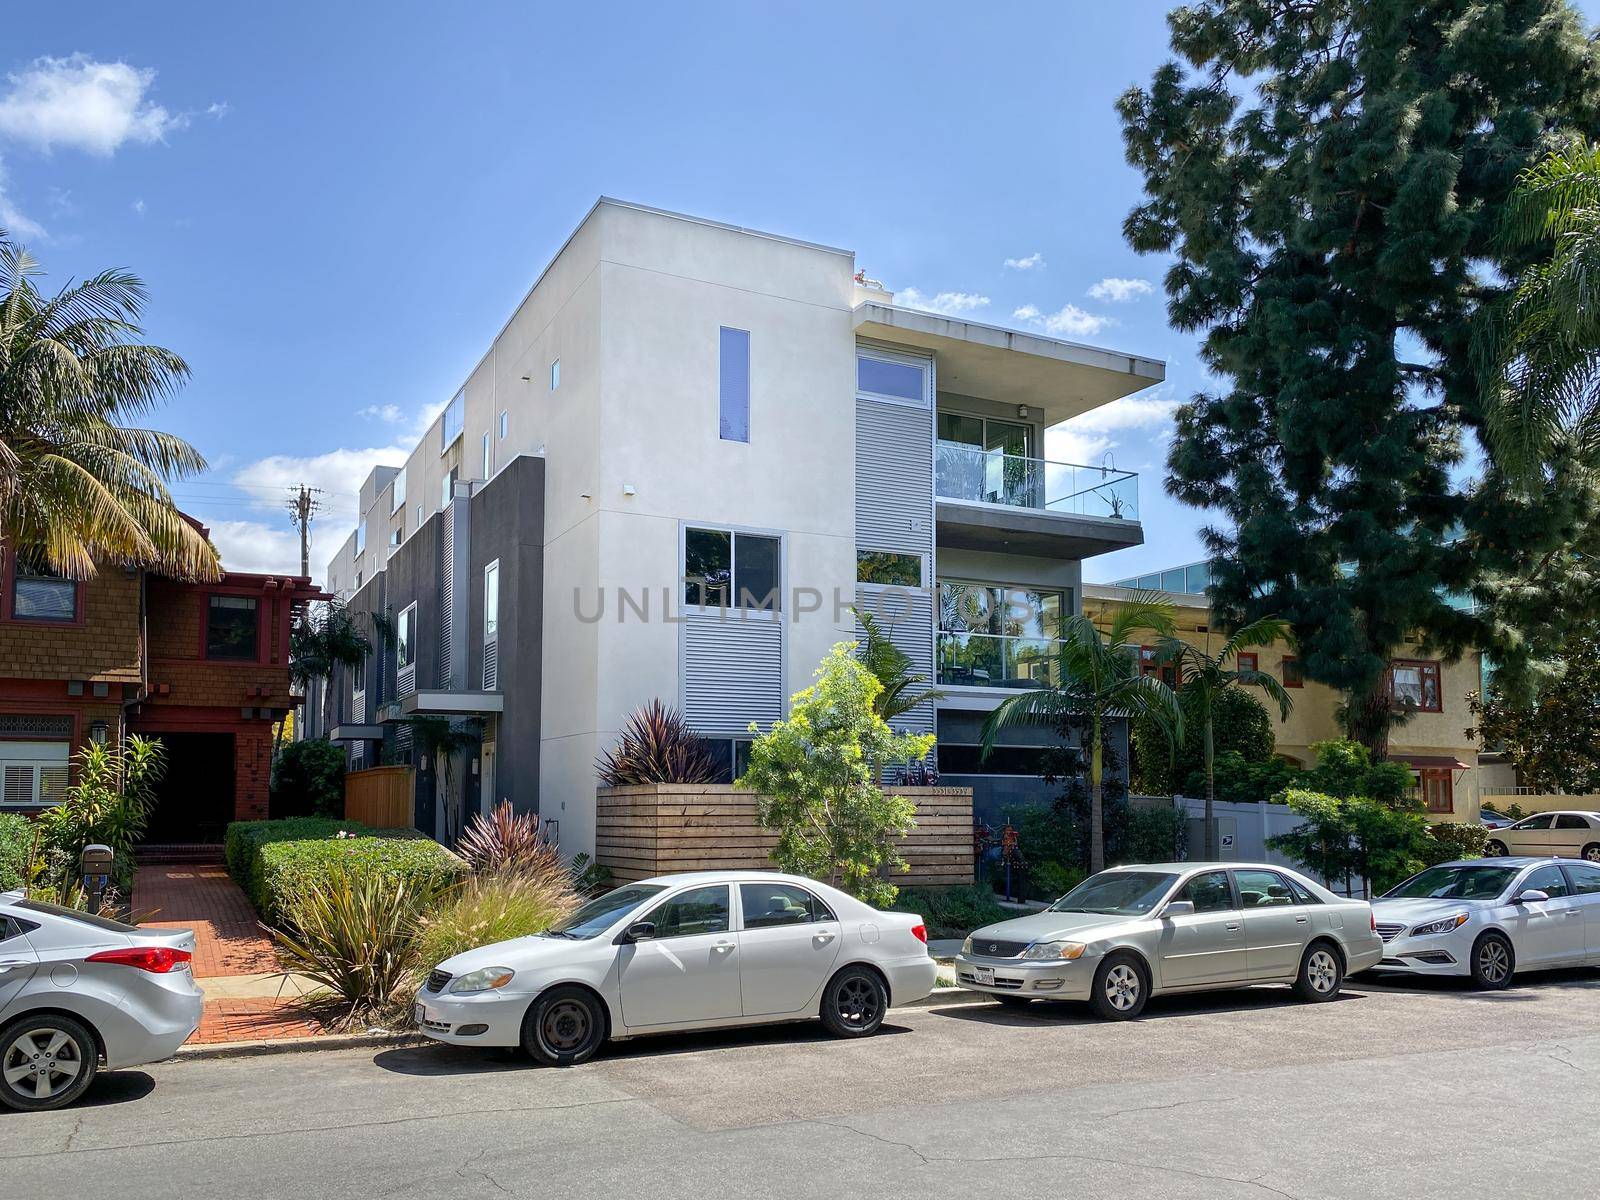 Modern apartment building in Hillcrest neighborhood in San Diego, California. USA. Tuesday 16th, 2021